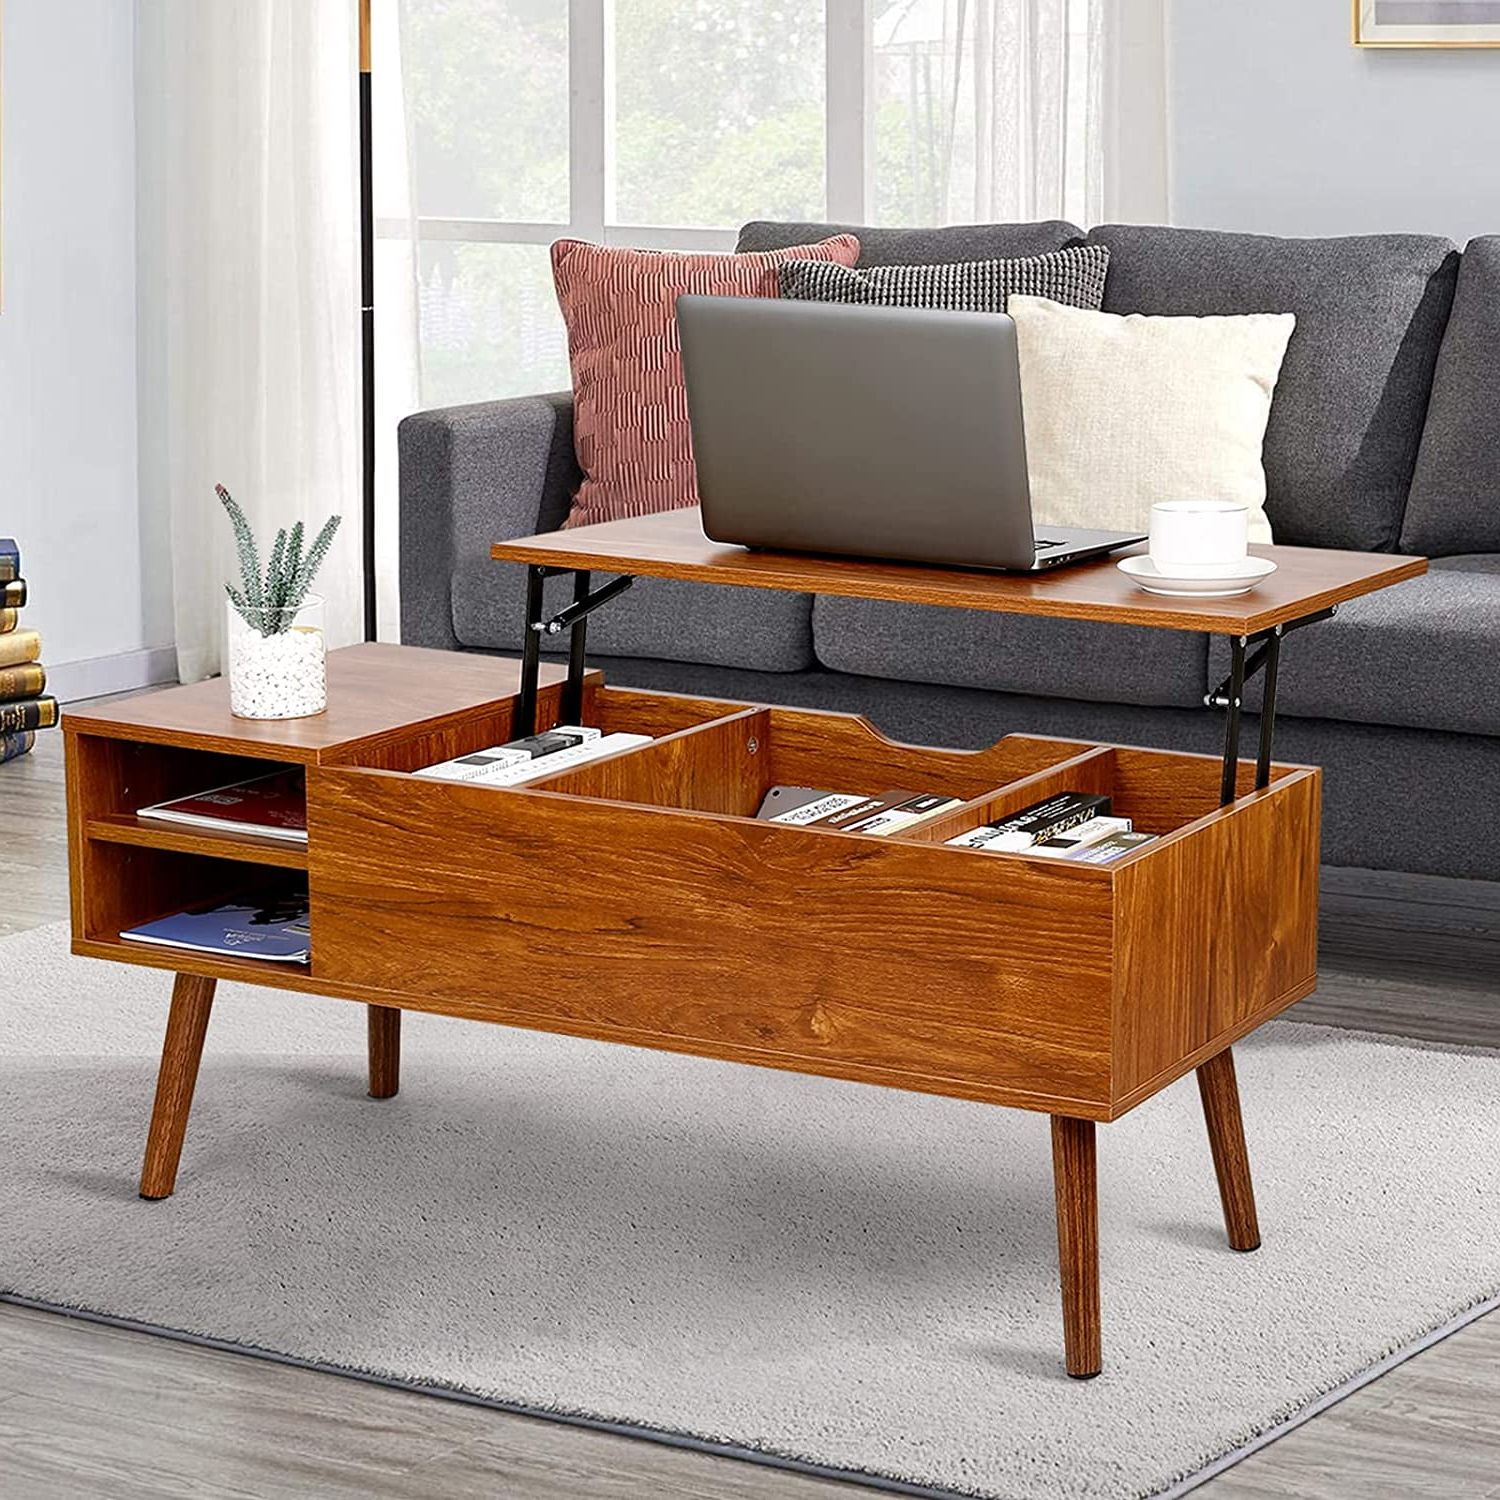 Modern Lift Top Coffee Table With Hidden Compartment Storage,adjustable With Regard To Favorite Lift Top Coffee Tables With Hidden Storage Compartments (View 2 of 15)